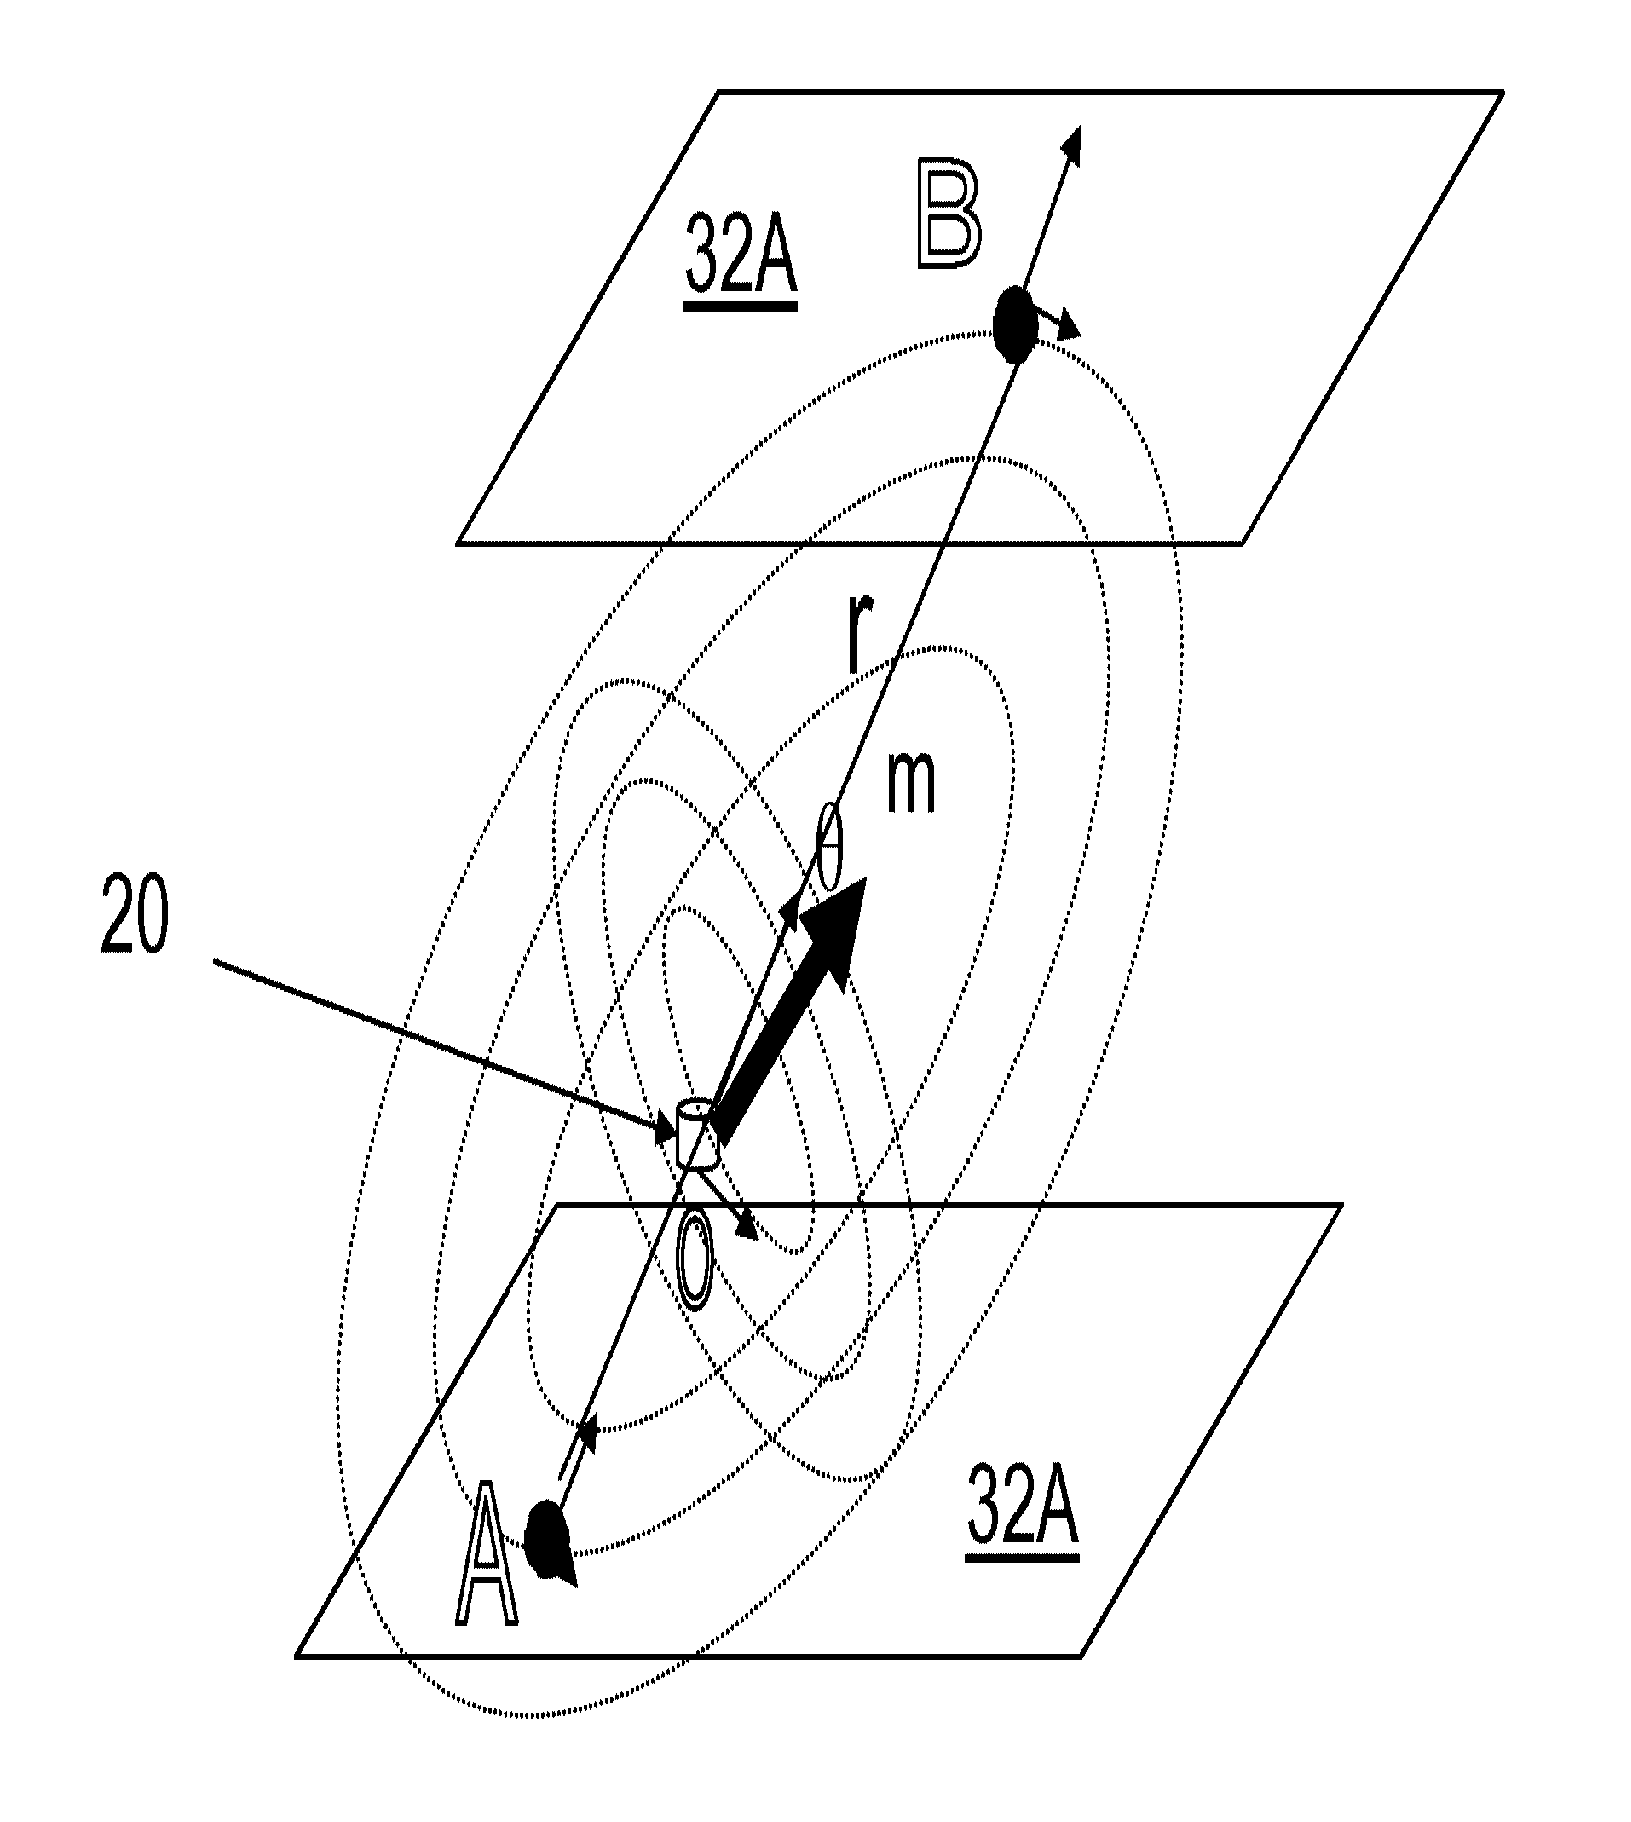 System and method for determining the position of a remote object